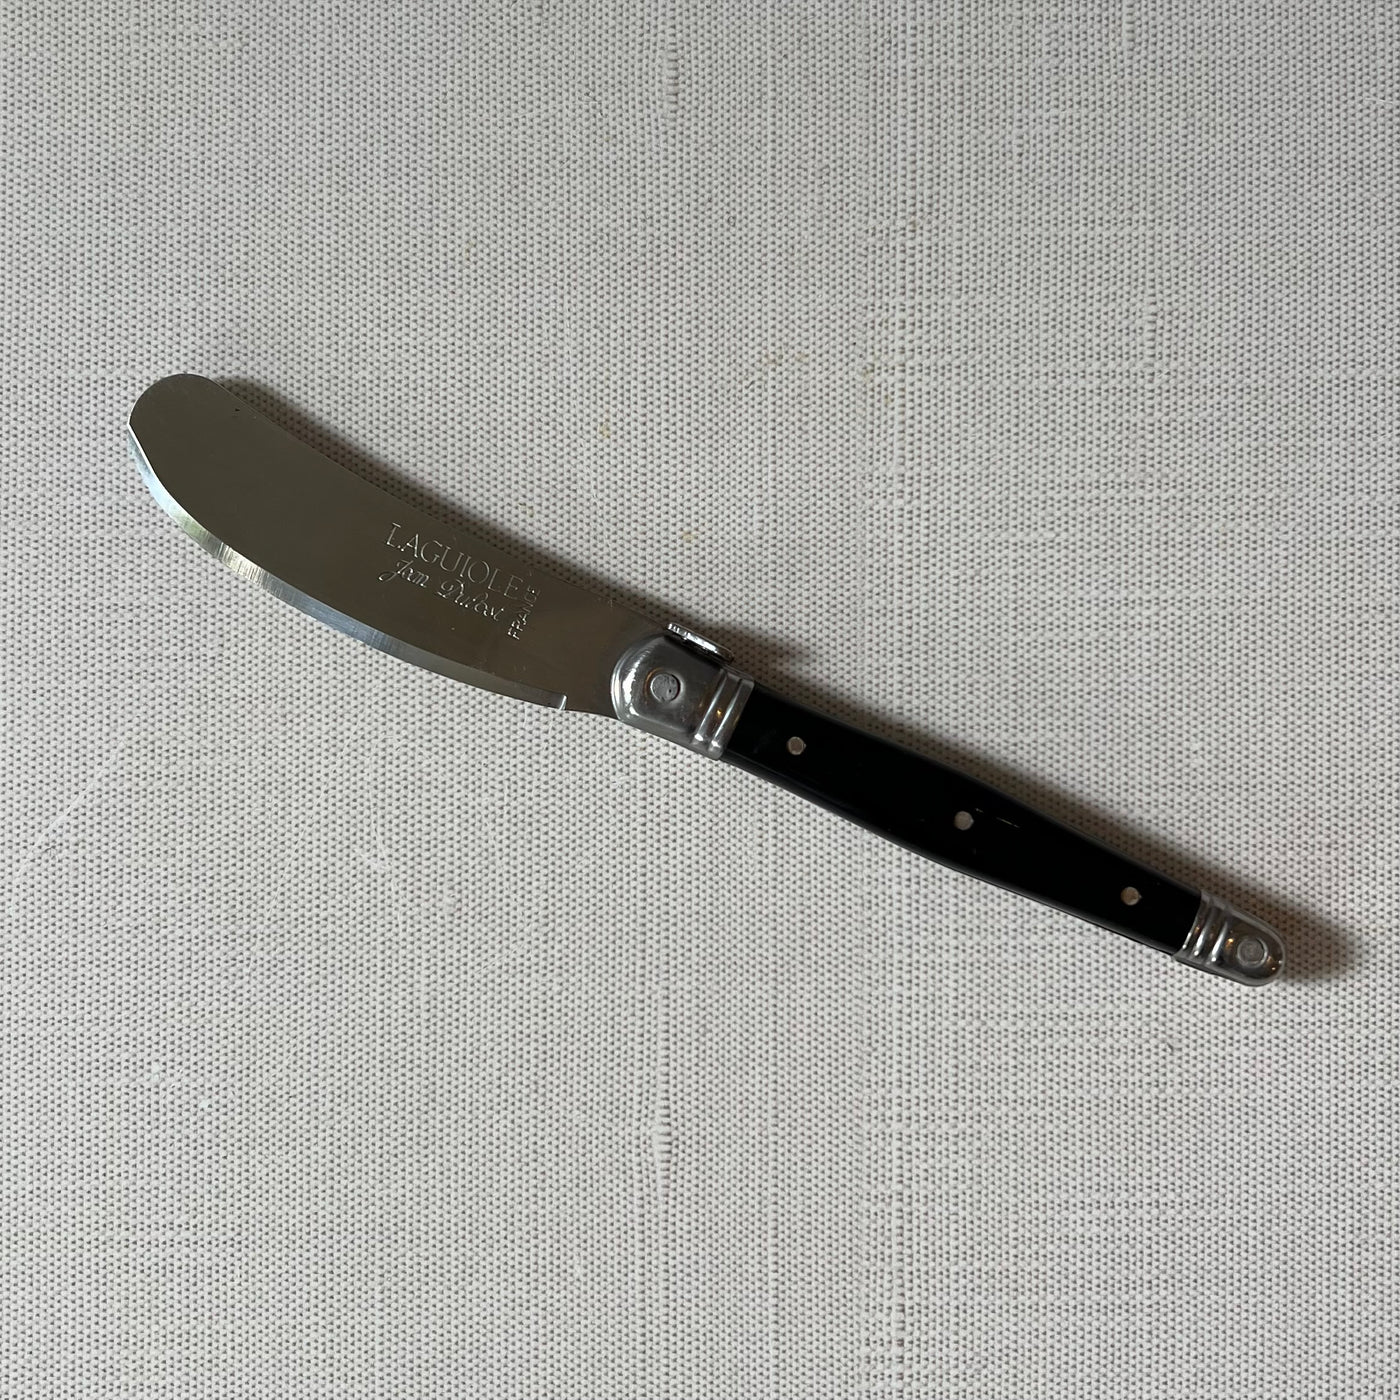 Black handled knife with silver cutting edge